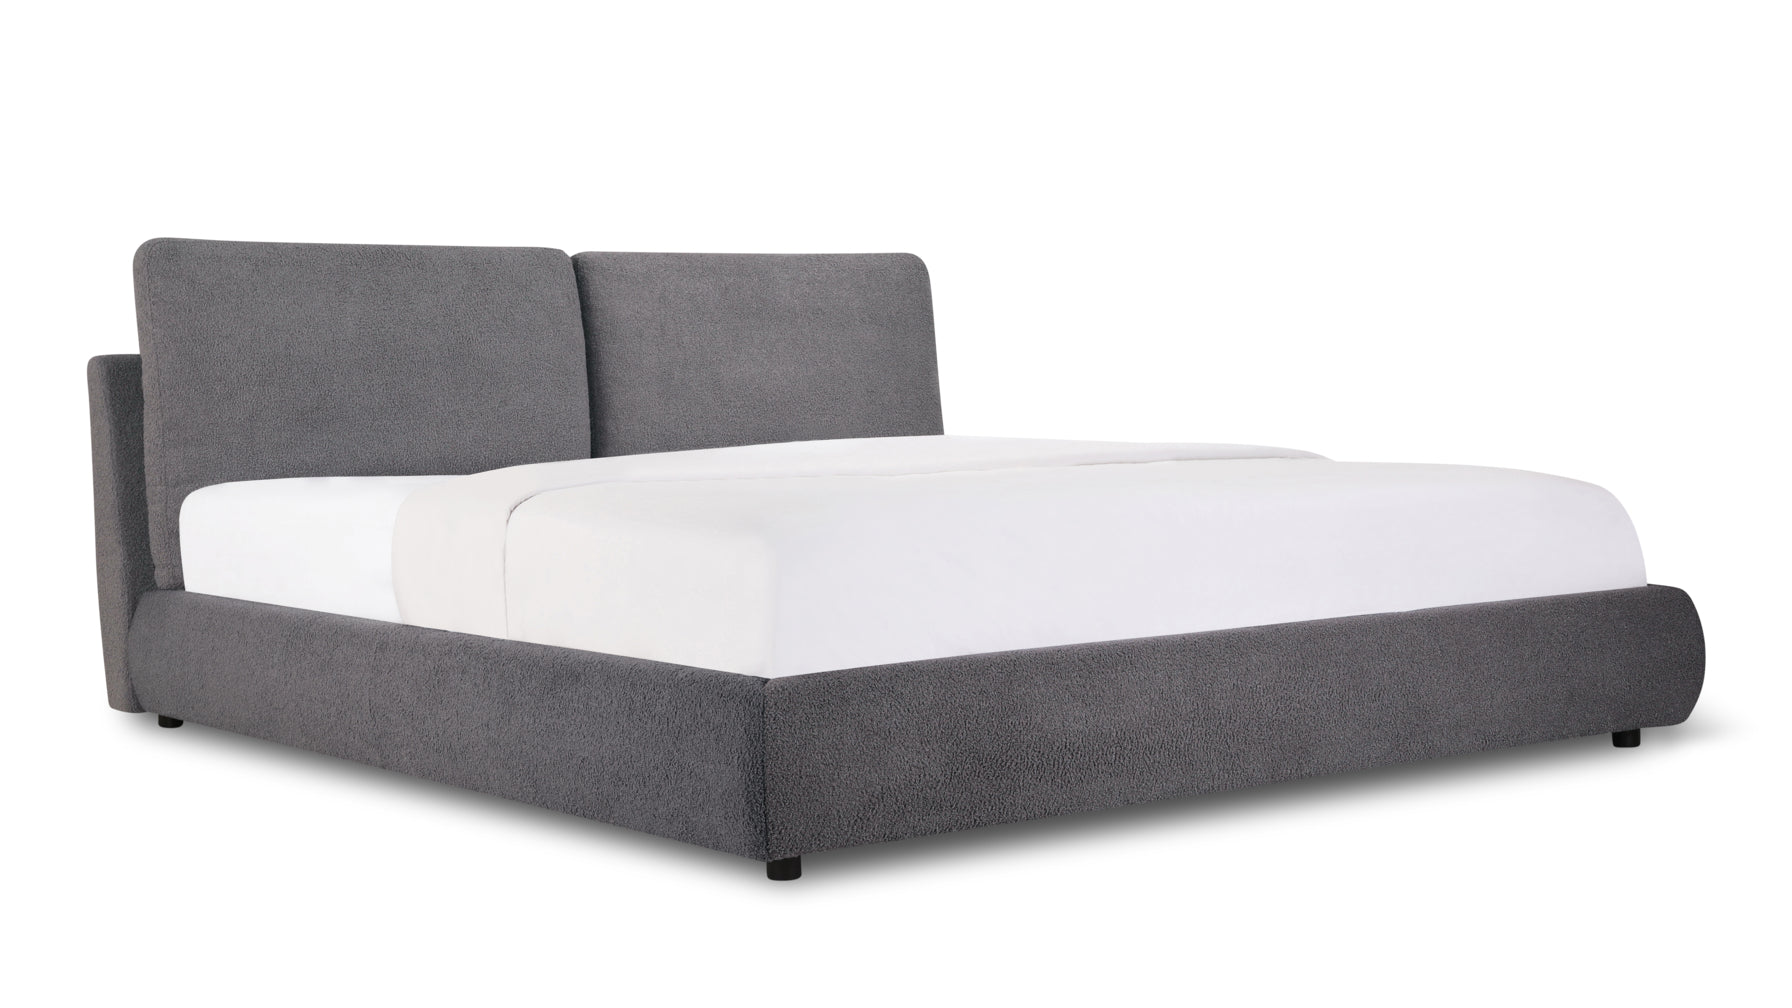 Cloud Bed with Storage, King, Putty - Image 3